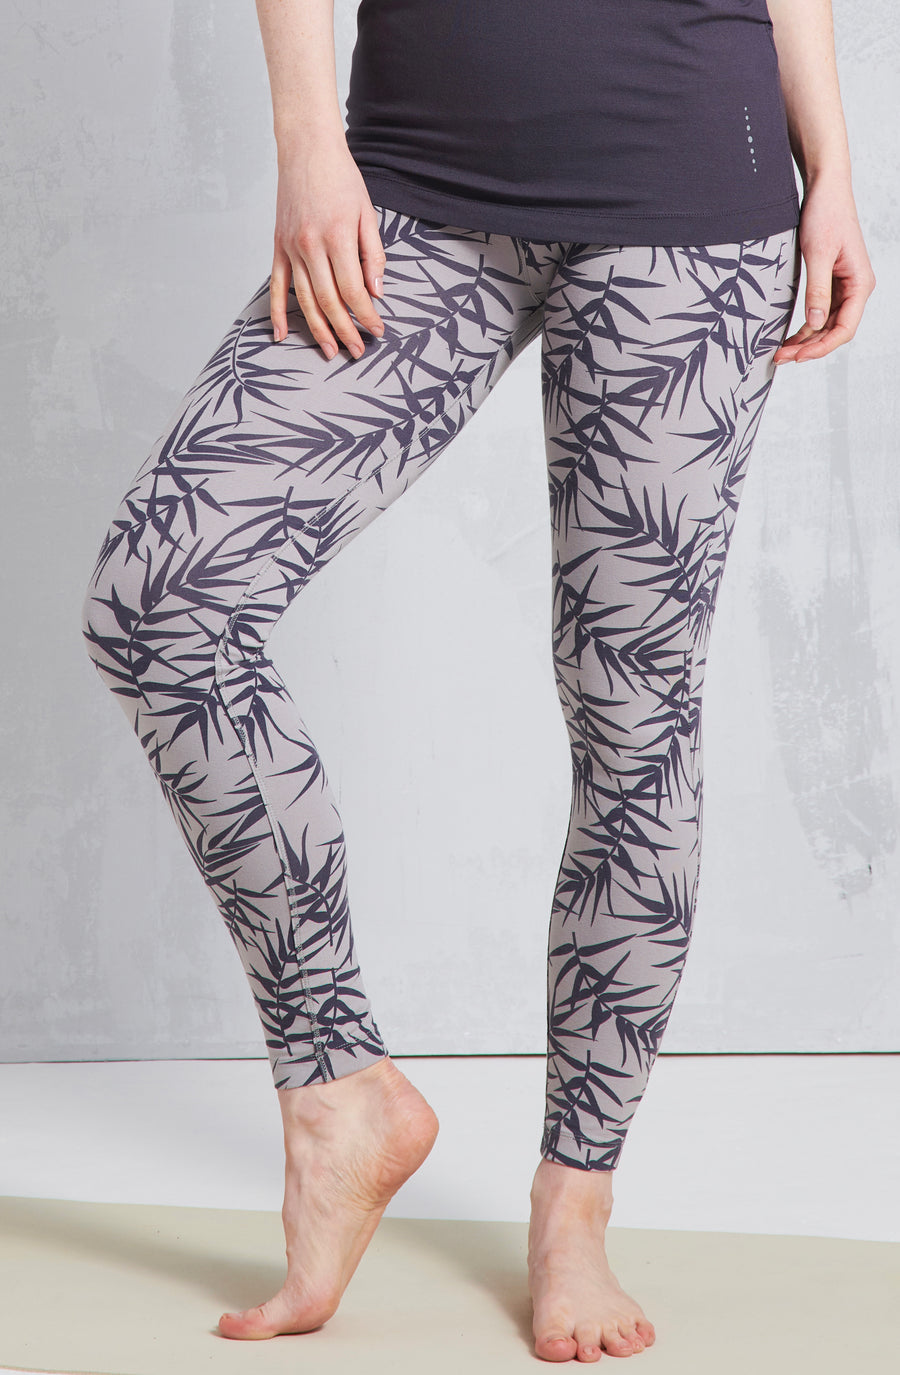 Flow with it Leggings - Bamboo